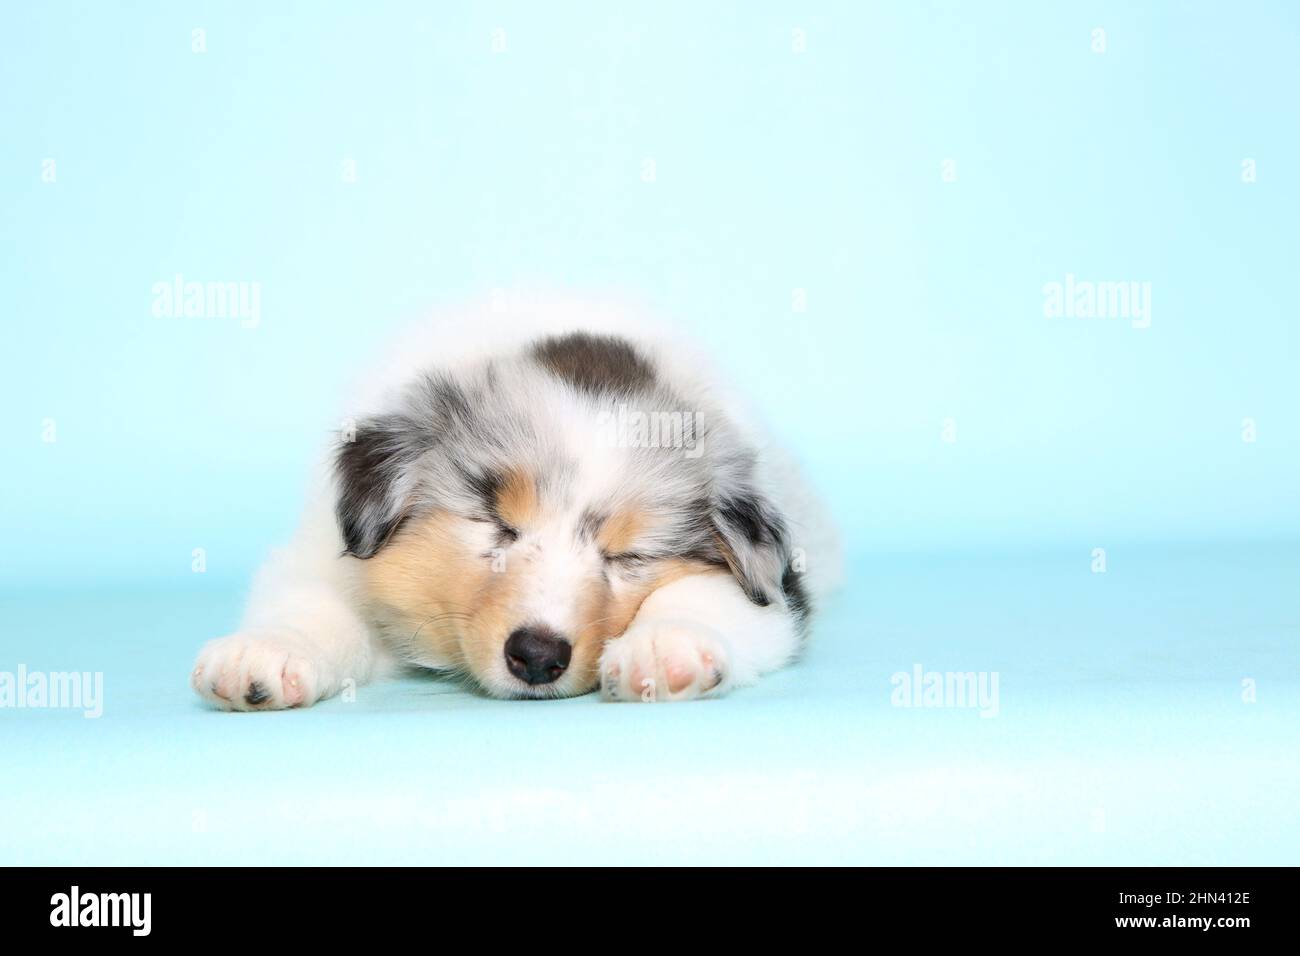 American Collie, Long-haired Collie. Puppy sleeping. Studio picture against a light-blue background. Germany Stock Photo